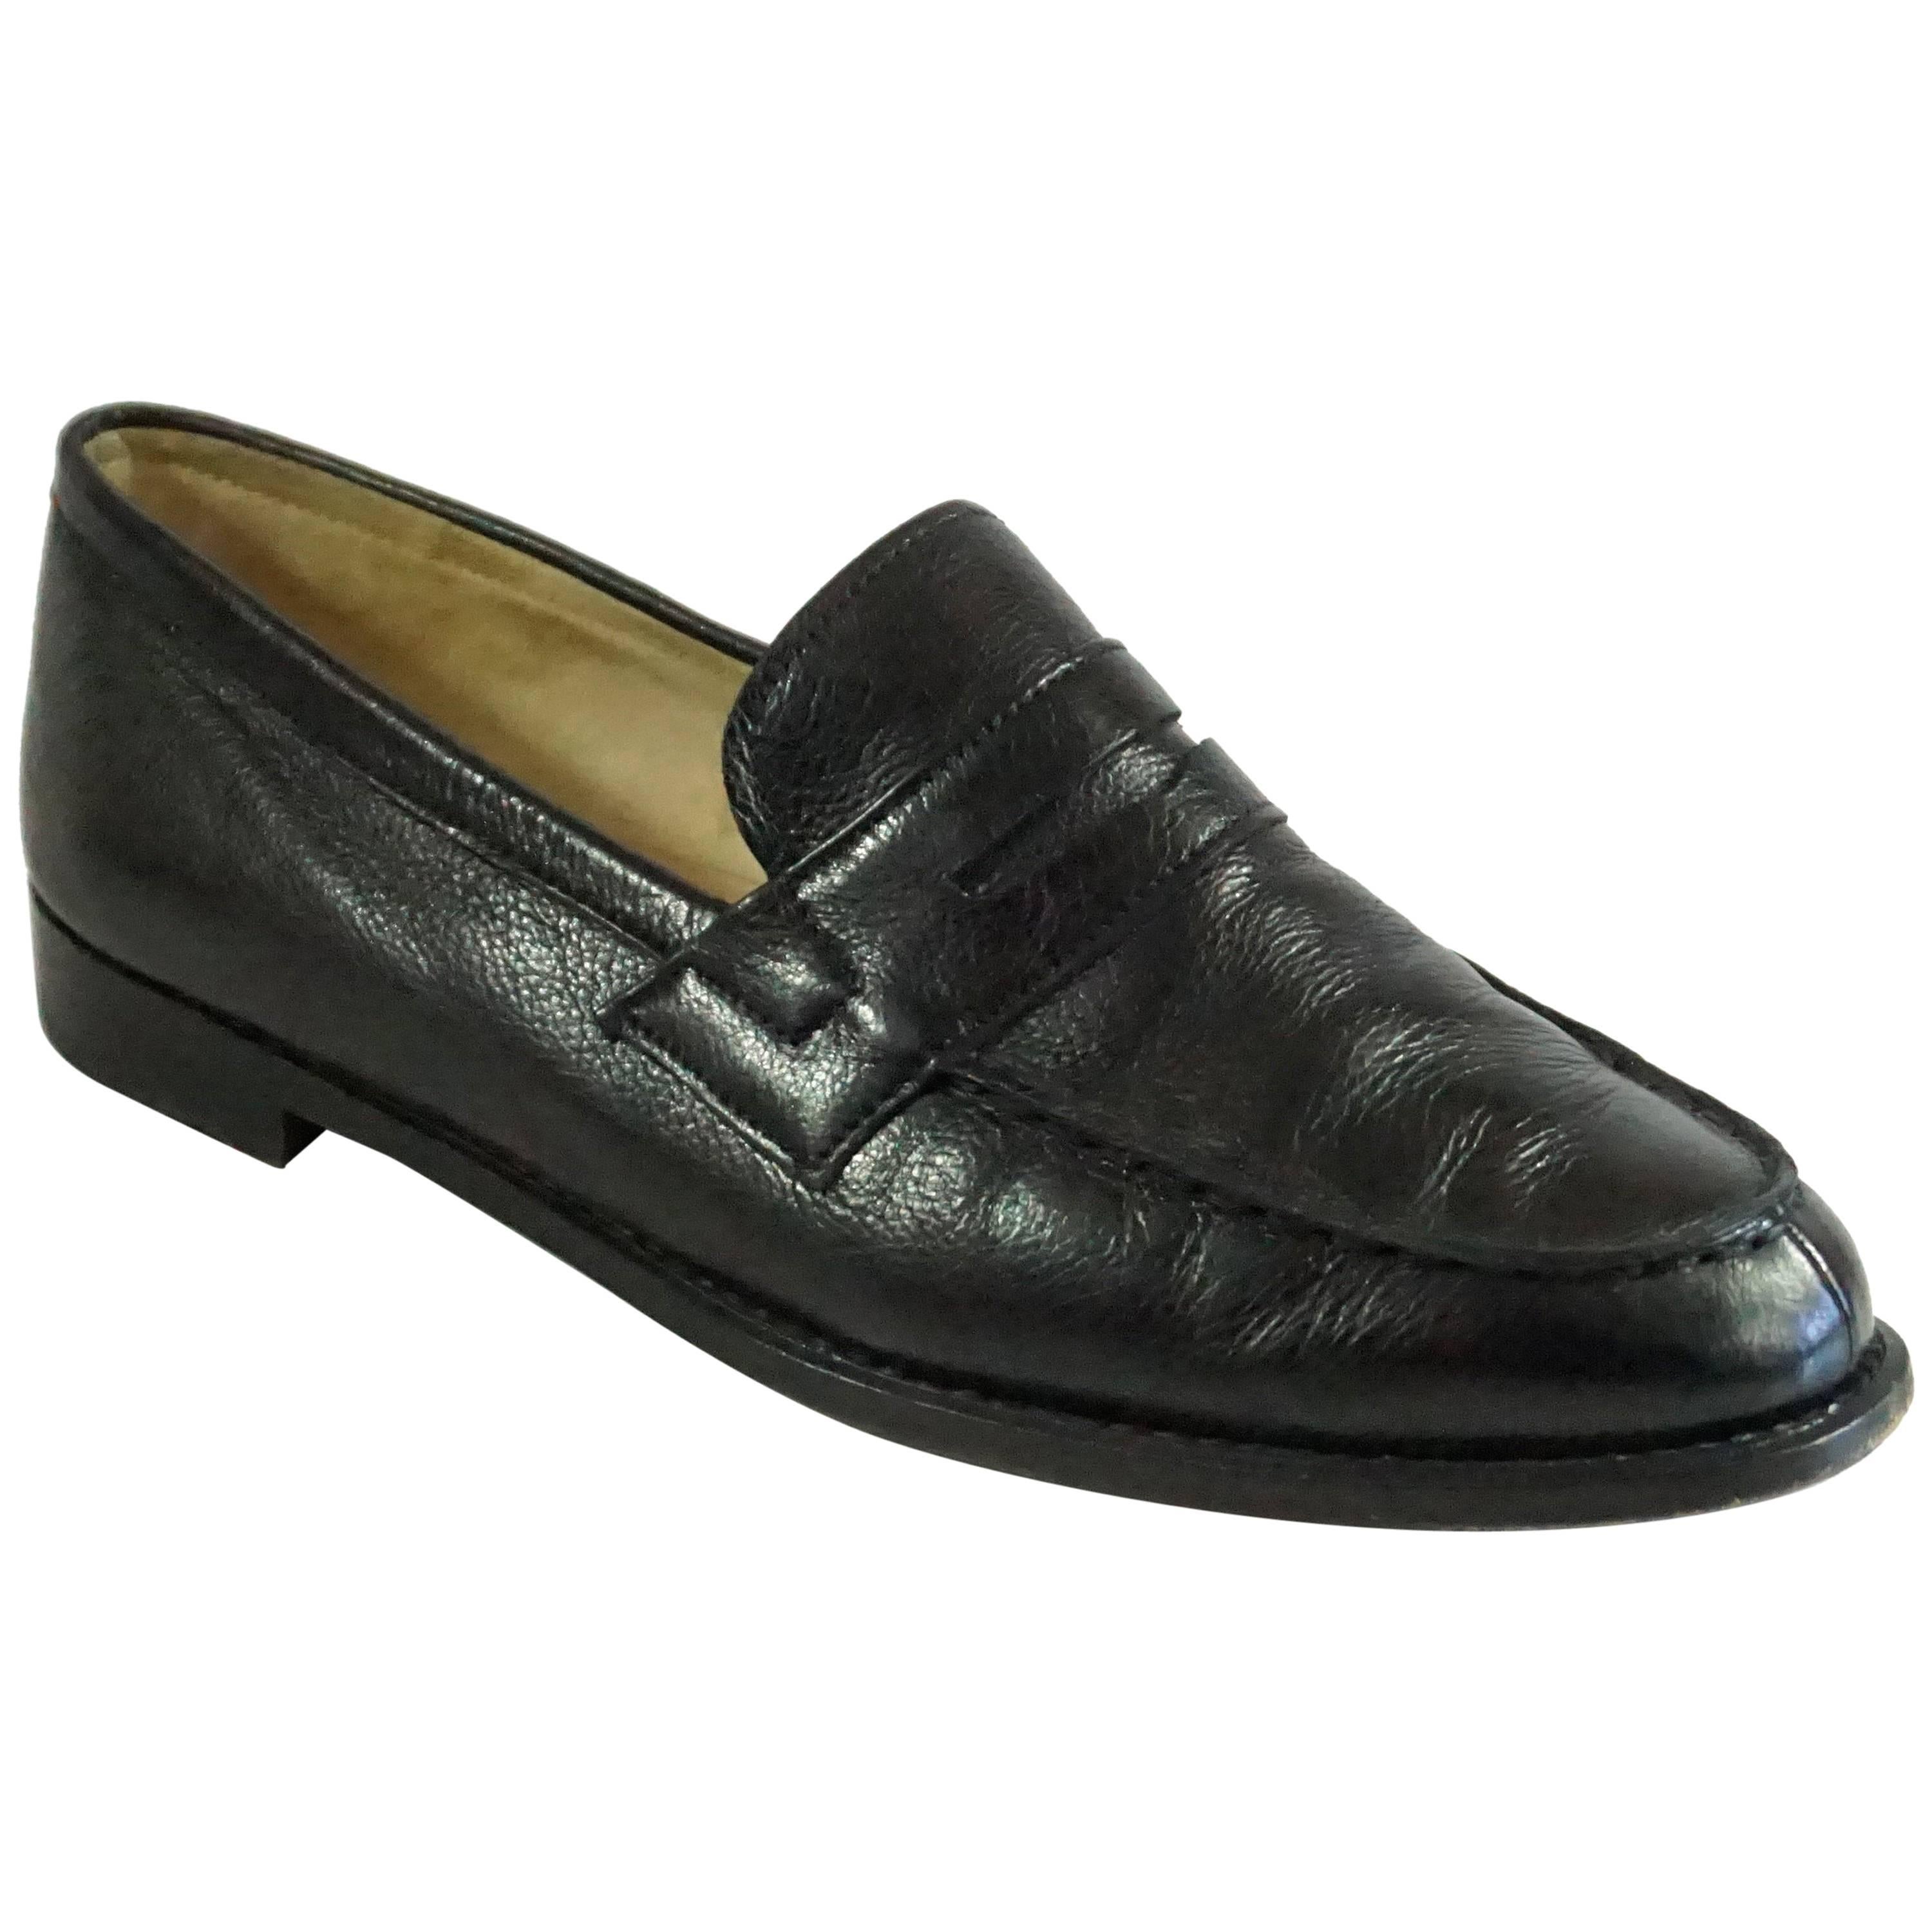 Manolo Blahnik Black Leather Penny Loafers -37.5 For Sale